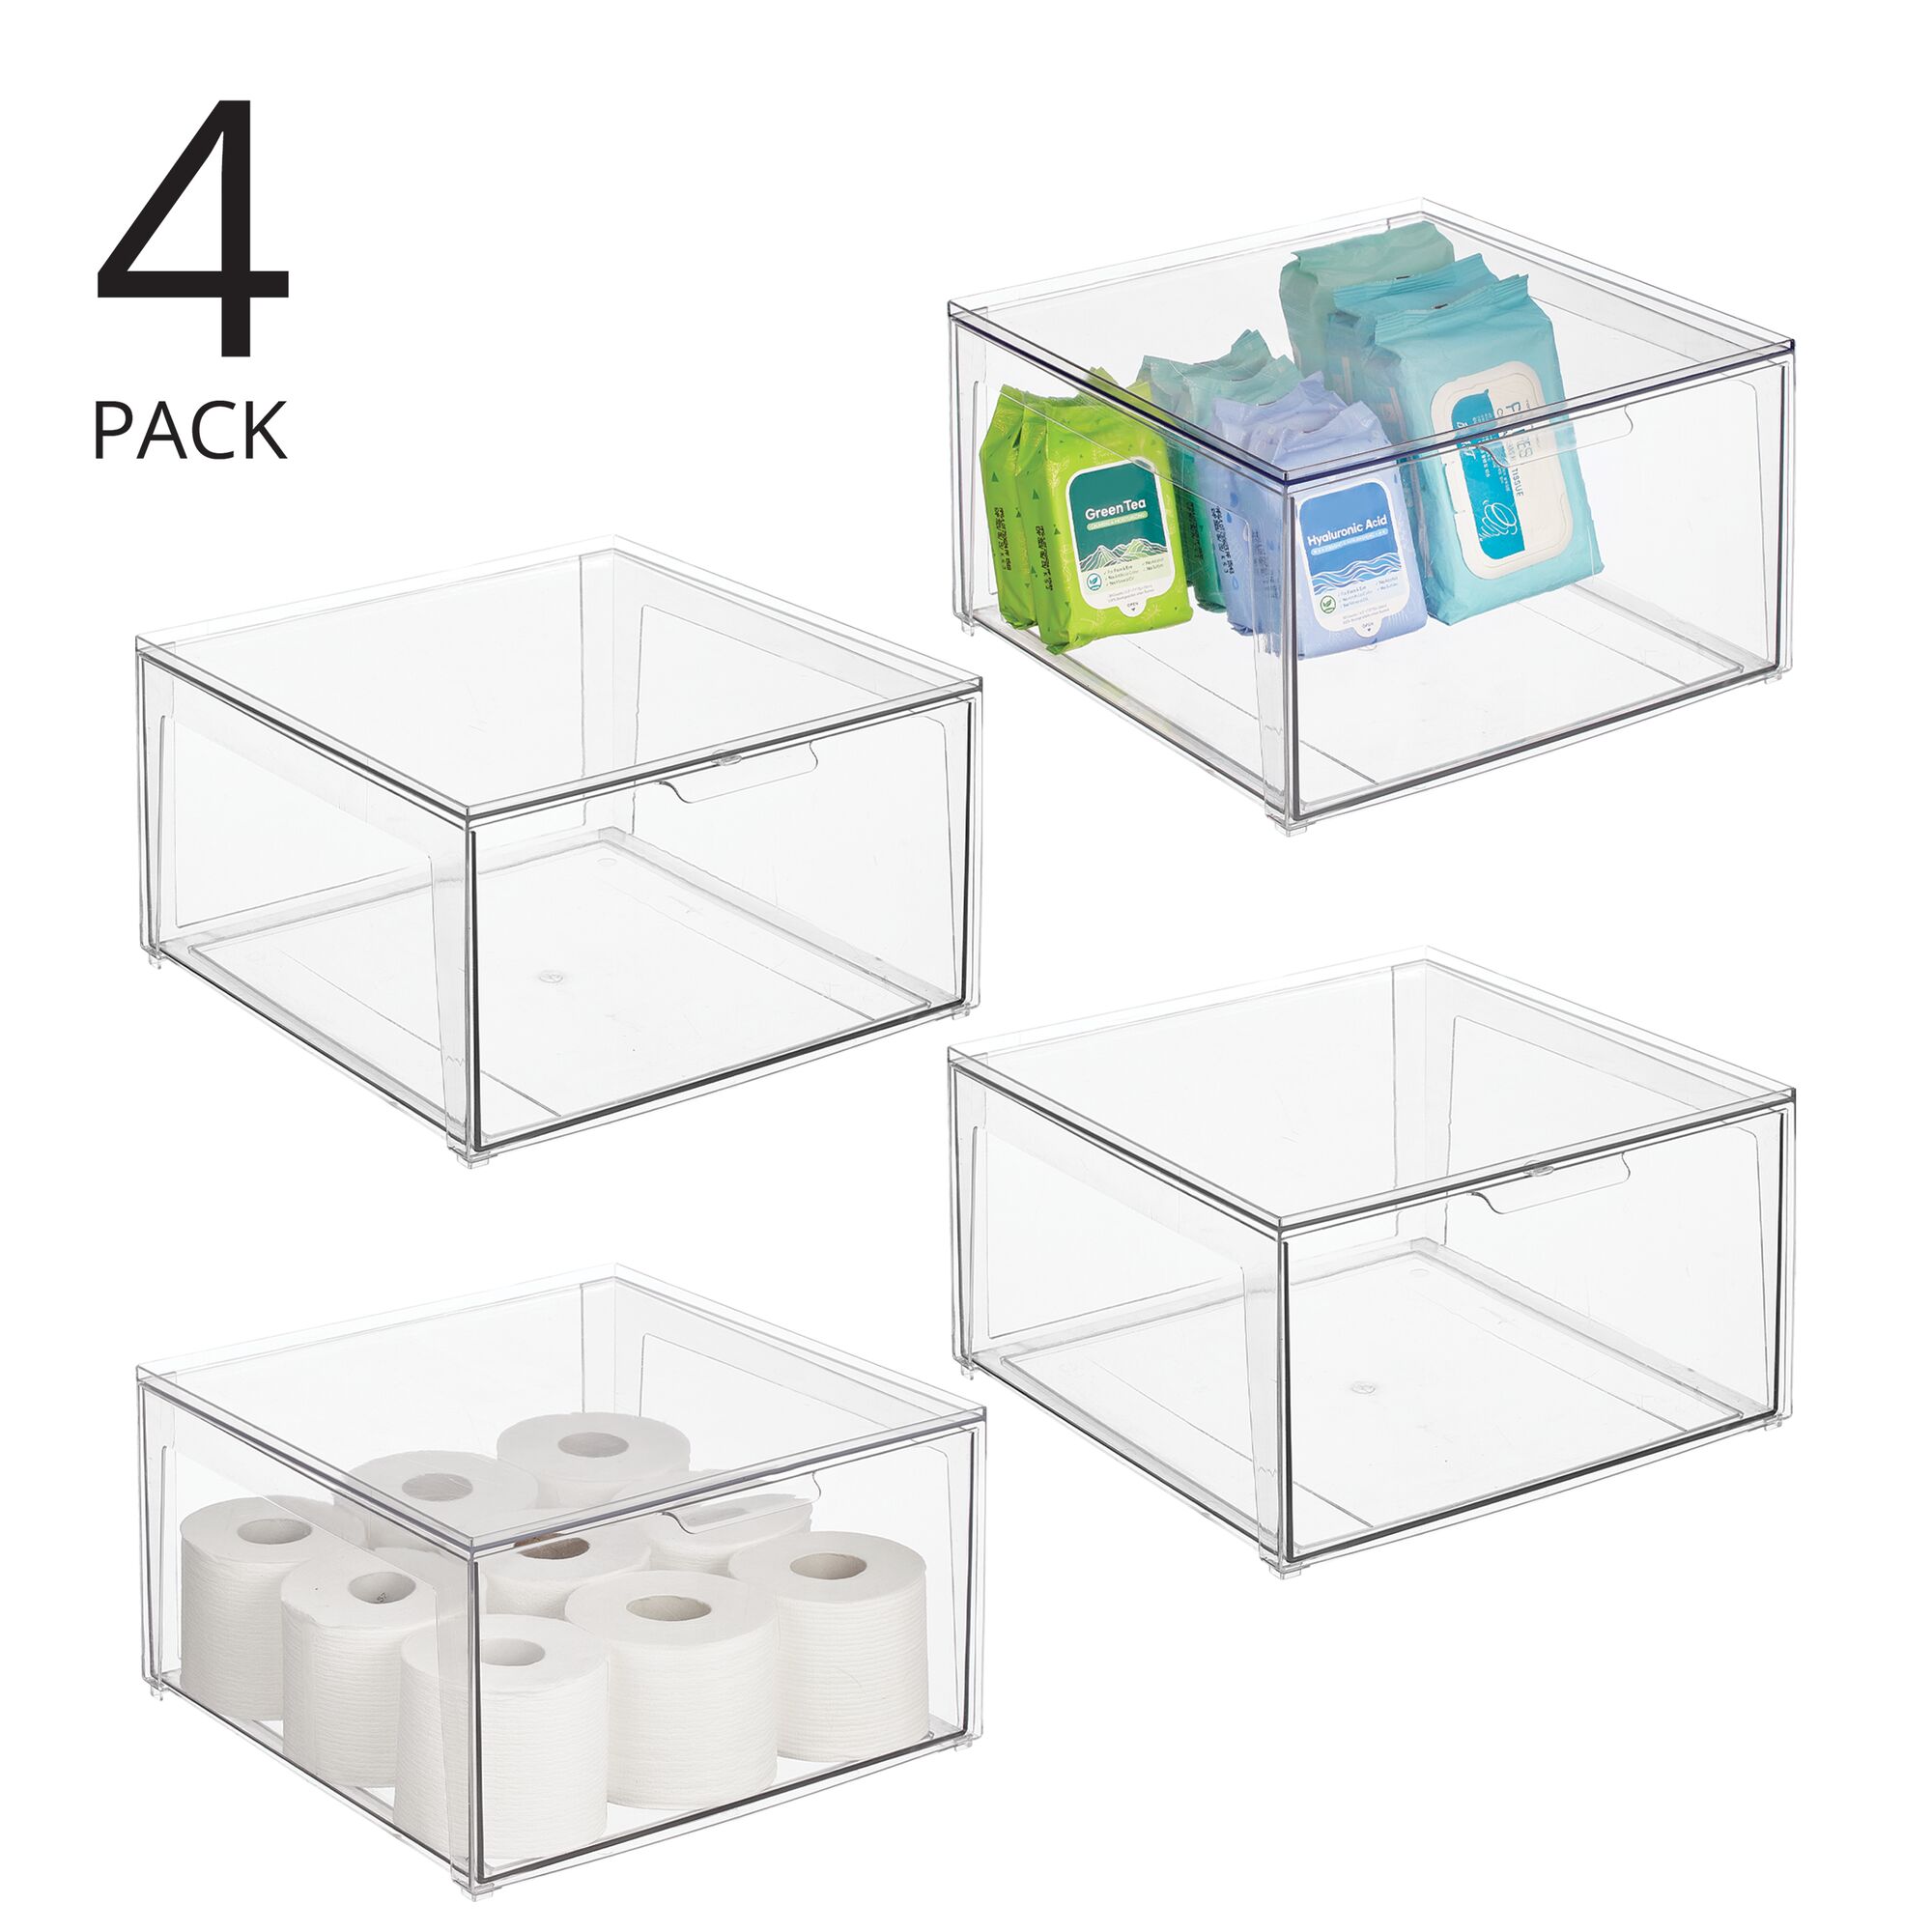 Skywin Plastic Stackable Storage Bins for Pantry - Stackable Bins for Organizing Food, Kitchen, and Bathroom Essentials (Black, 2-Pack)